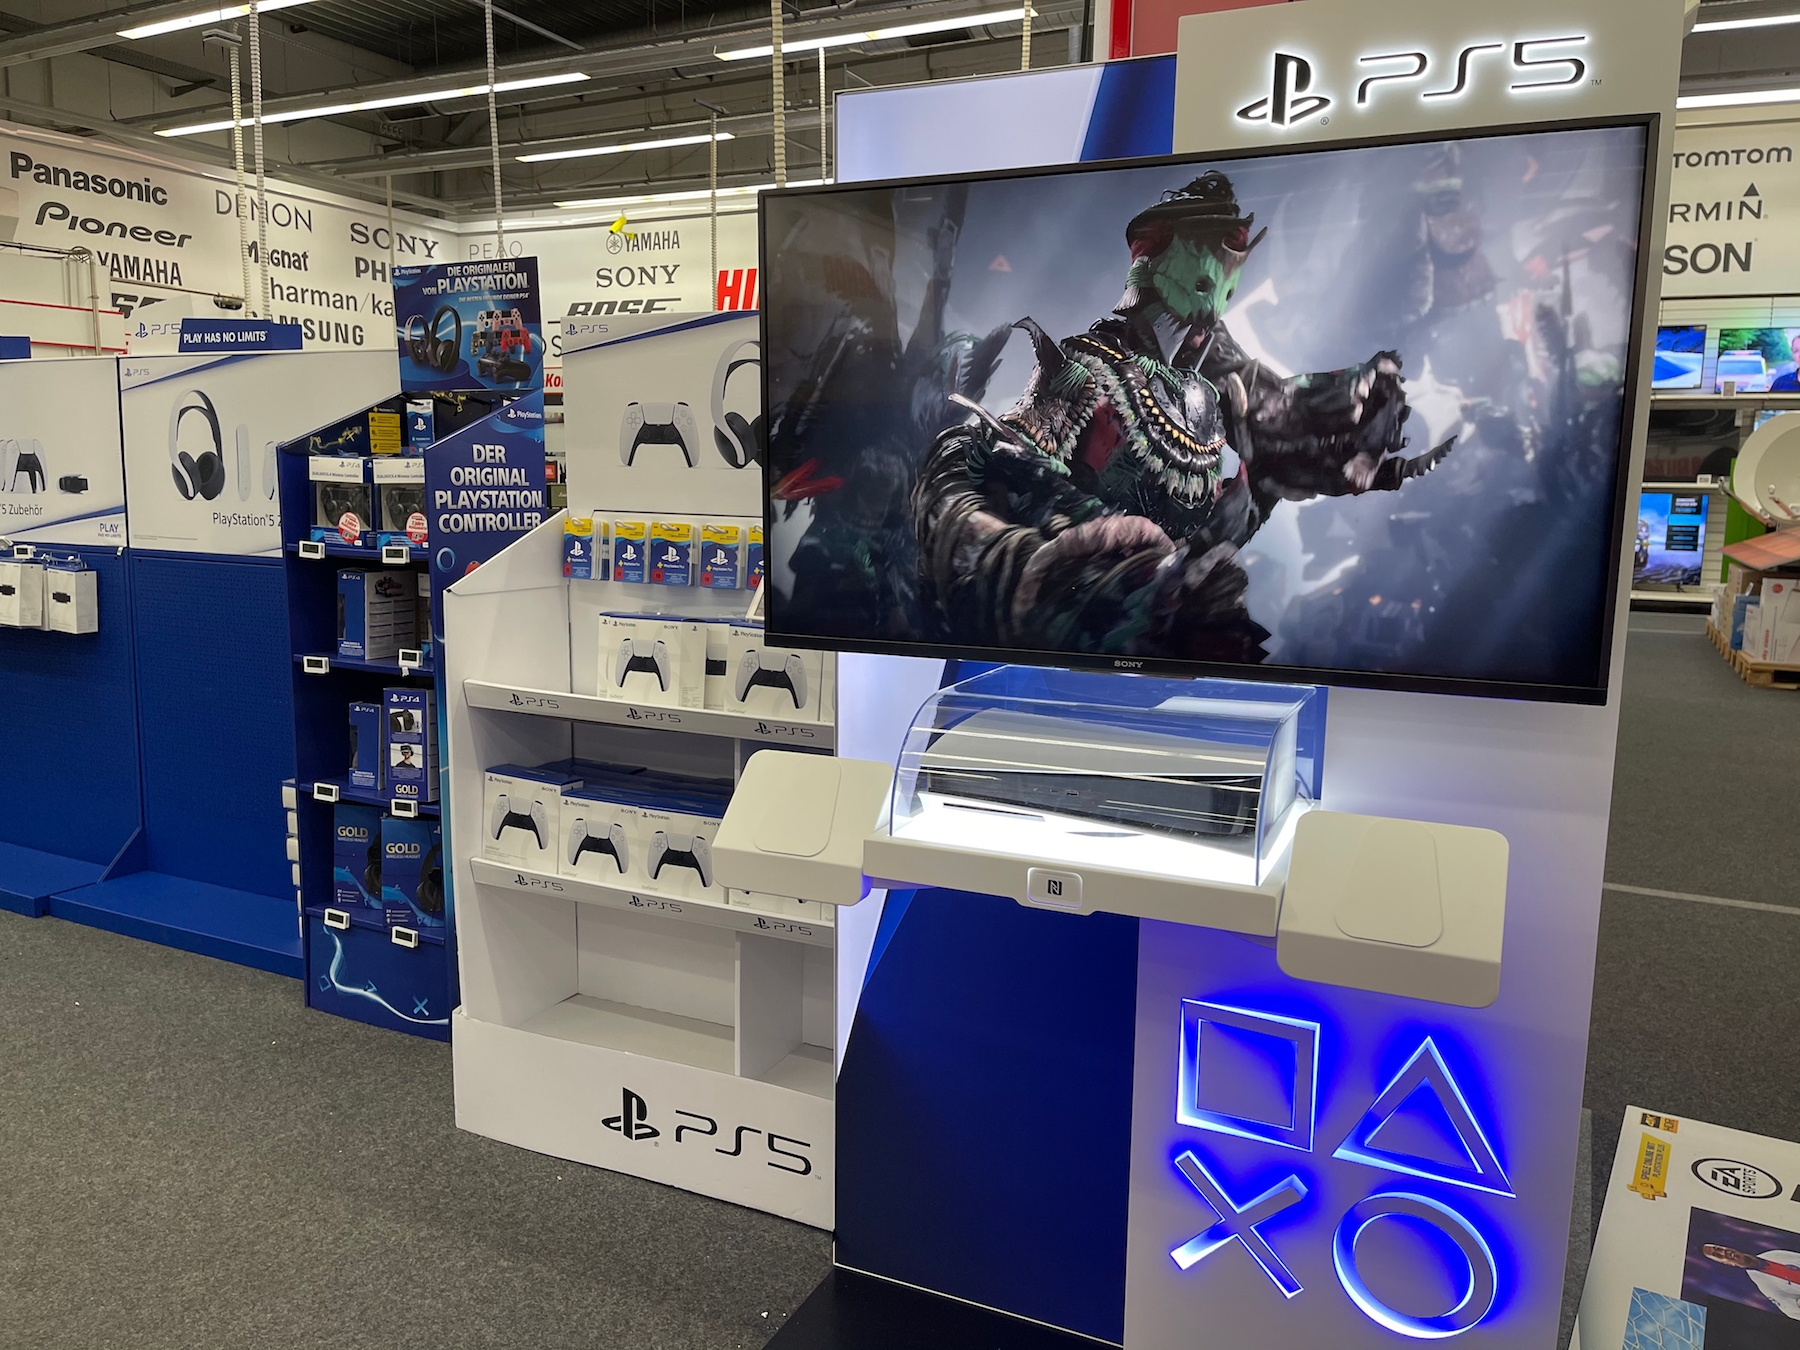 A sold-through PS5 display at a retailer in Frankfurt, Germany (Nov. 14, 2020). (Photo: ms_pics_and_more, Shutterstock)